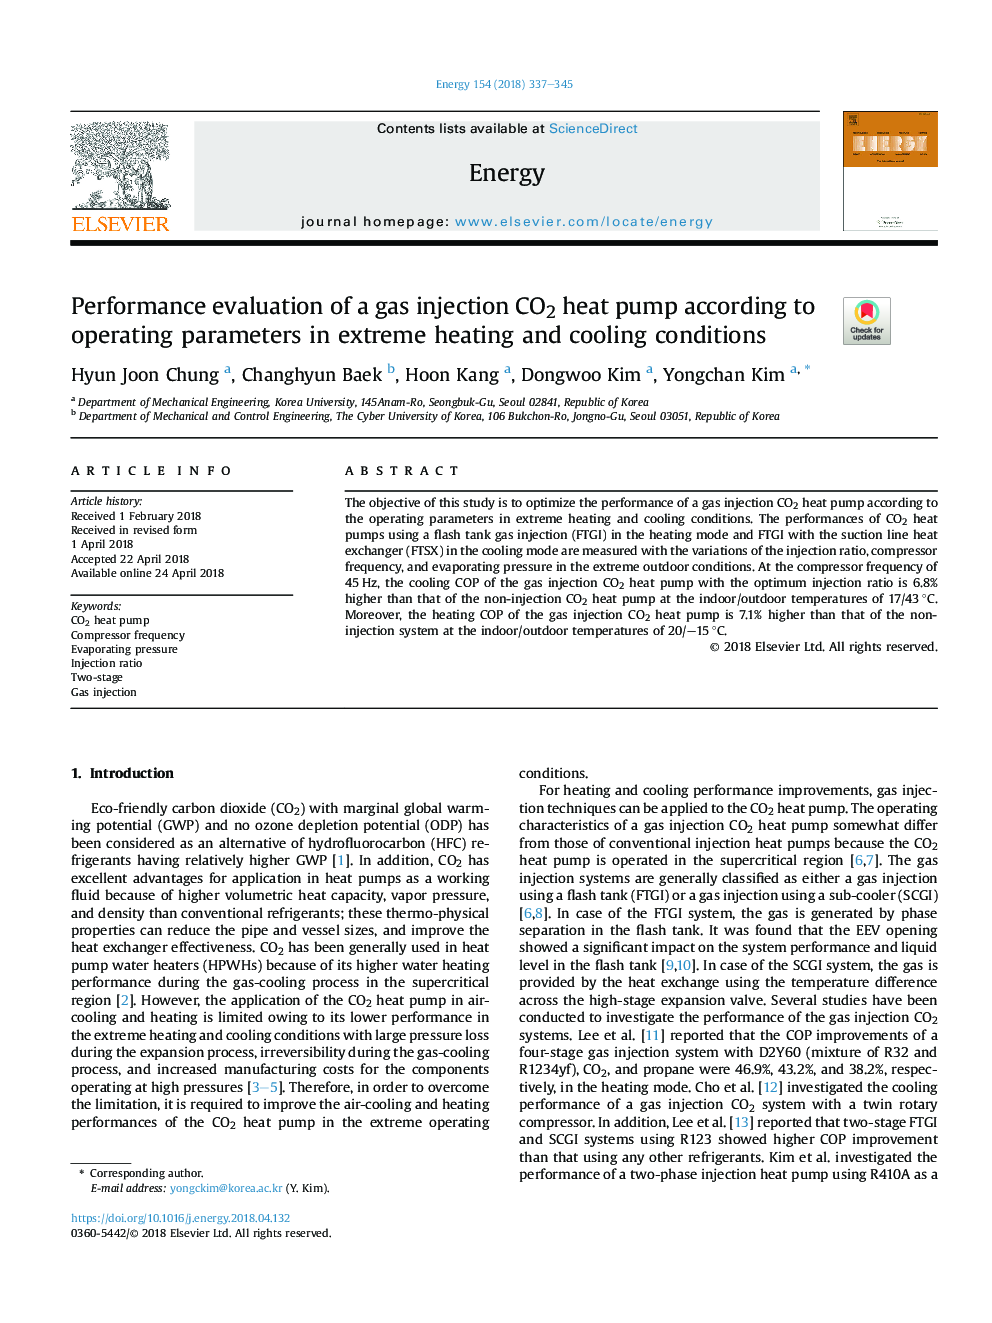 Performance evaluation of a gas injection CO2 heat pump according to operating parameters in extreme heating and cooling conditions